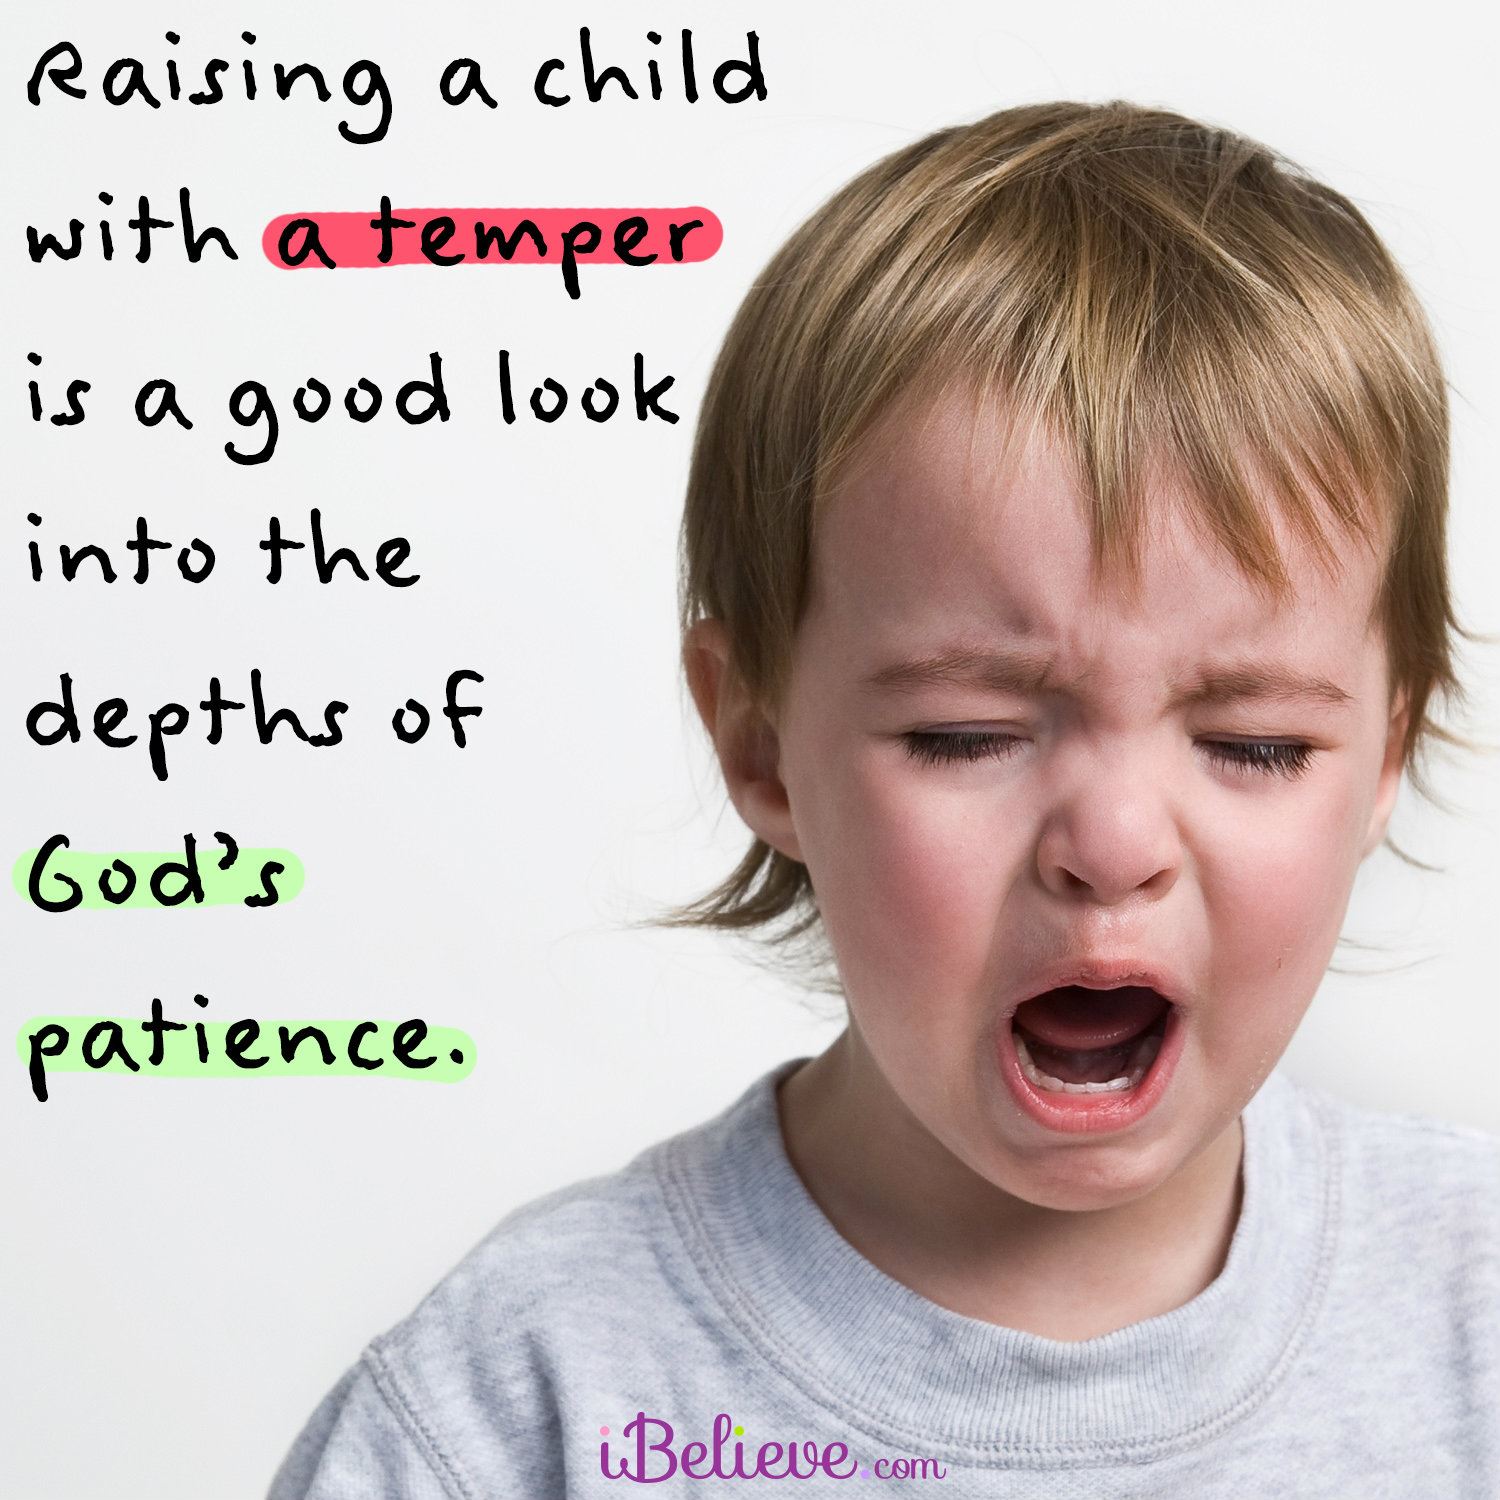 Pouting child nonetheless gives us insight into God's grace